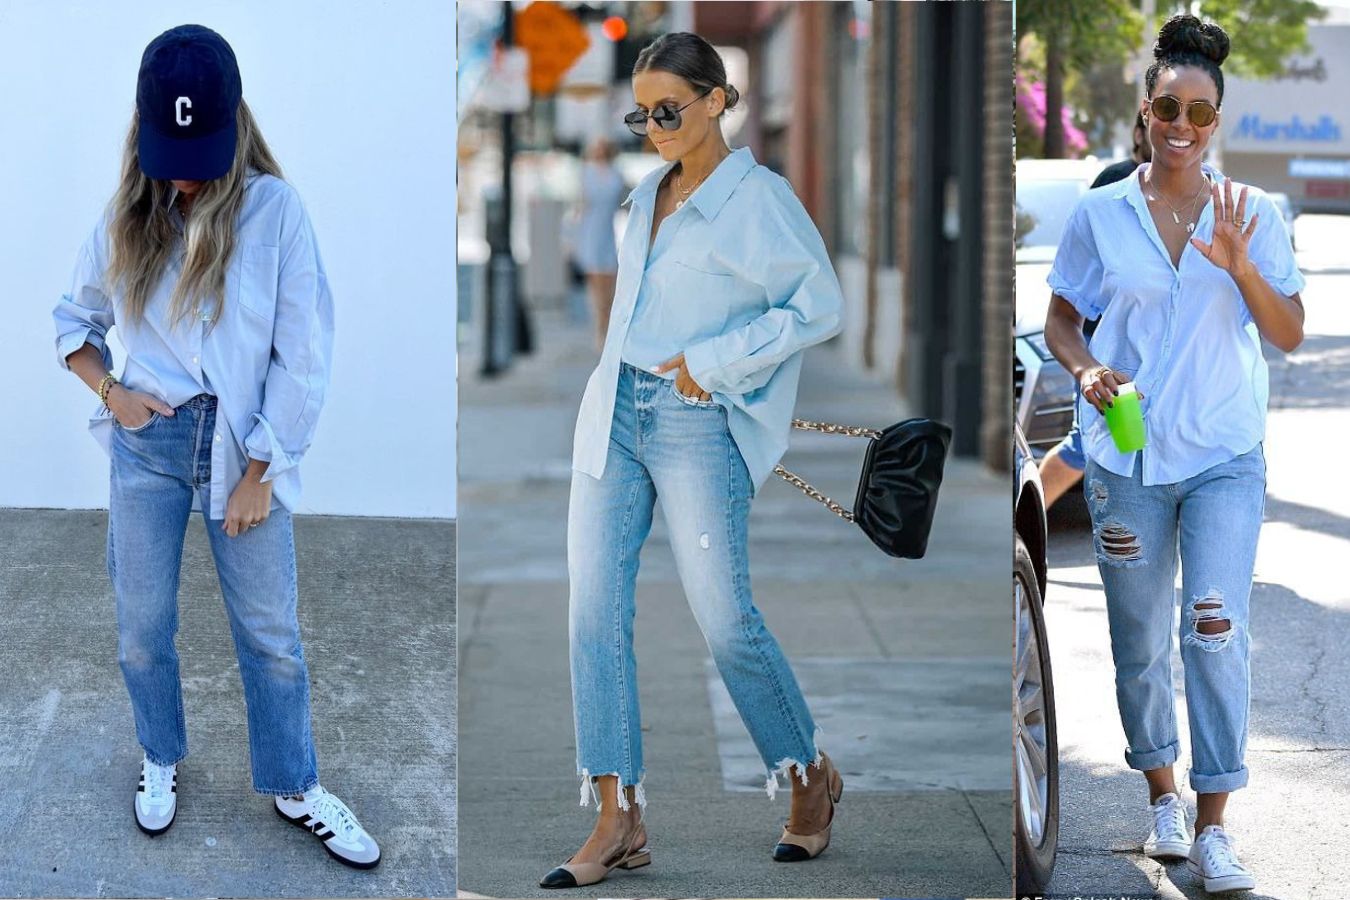 Pair Light Blue Jeans With Navy Blue Button-up Shirt And Sneakers